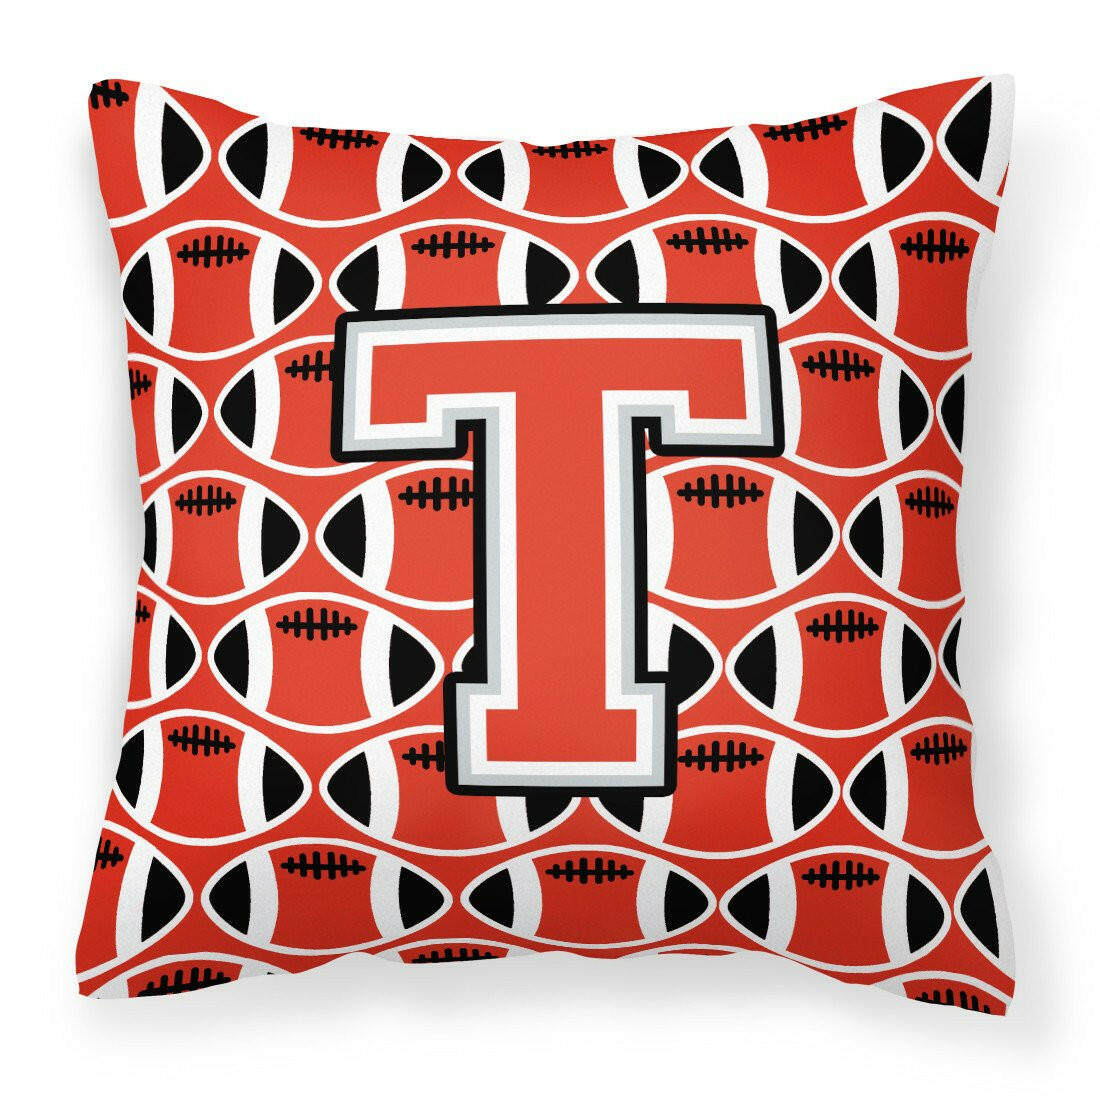 Letter T Football Scarlet and Grey Fabric Decorative Pillow CJ1067-TPW1414 by Caroline's Treasures